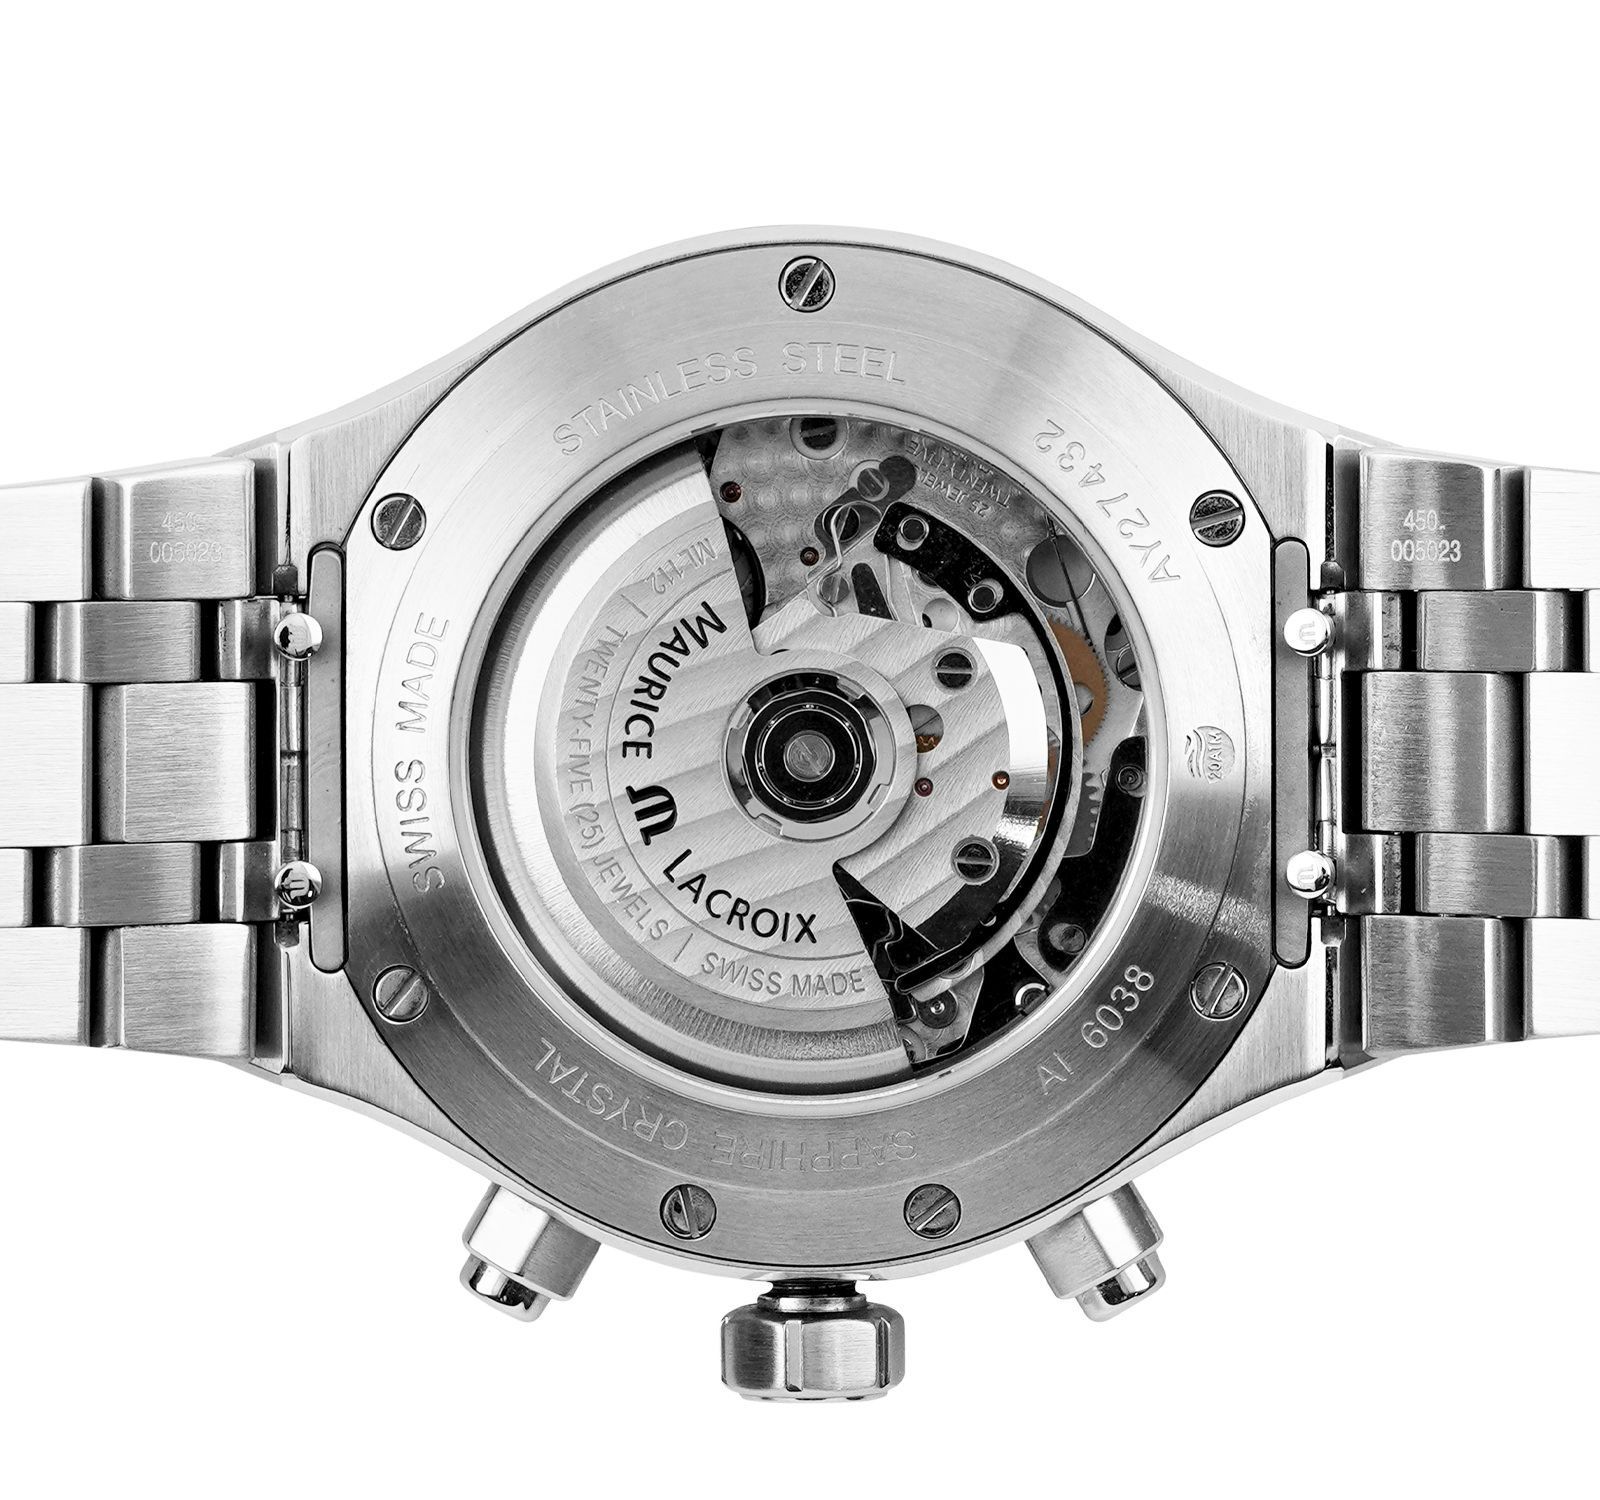 Maurice Lacroix Watches